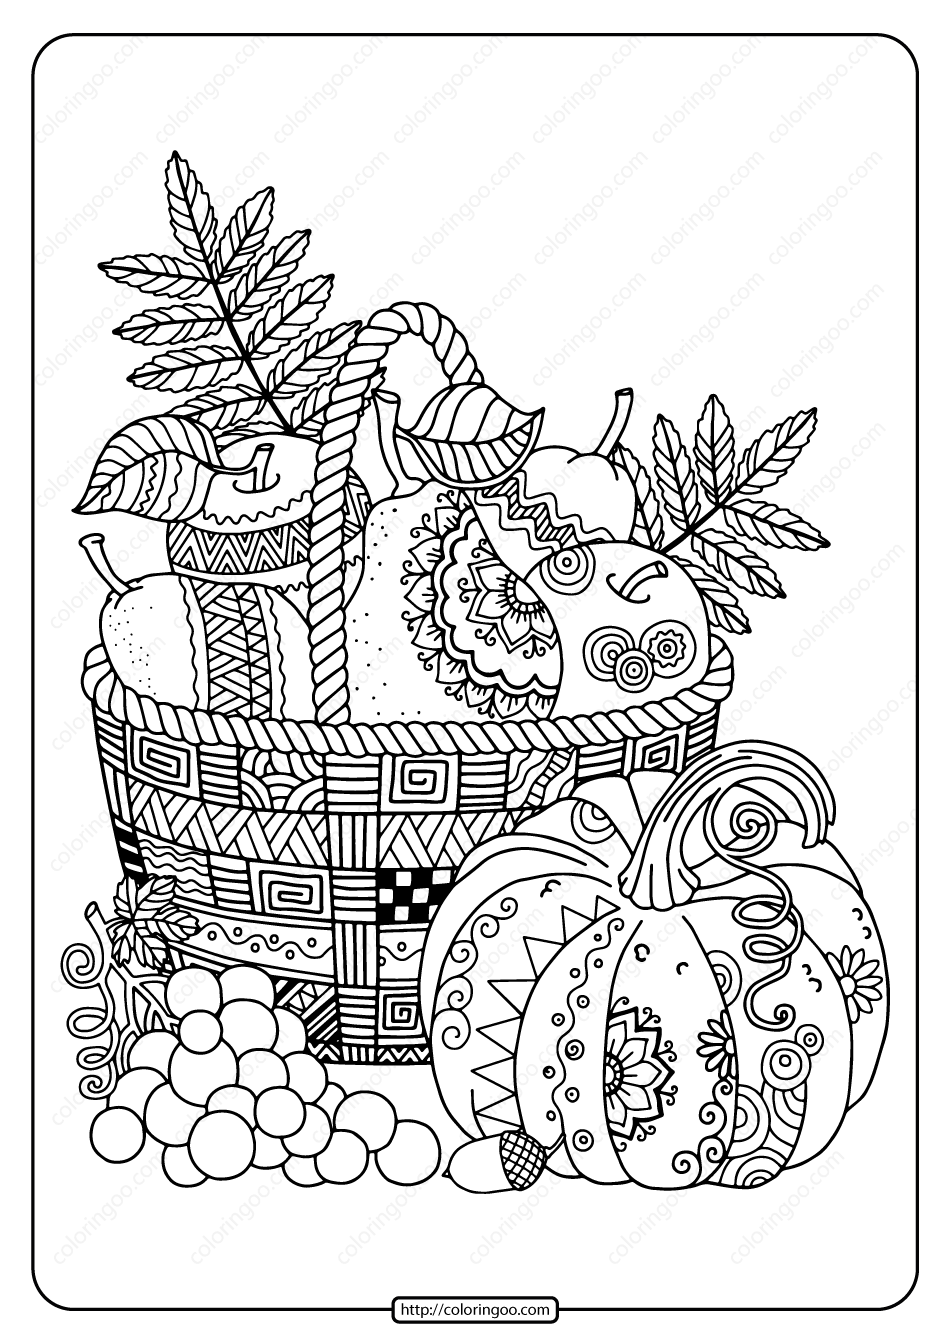 printable zentangle apples in basket coloring page